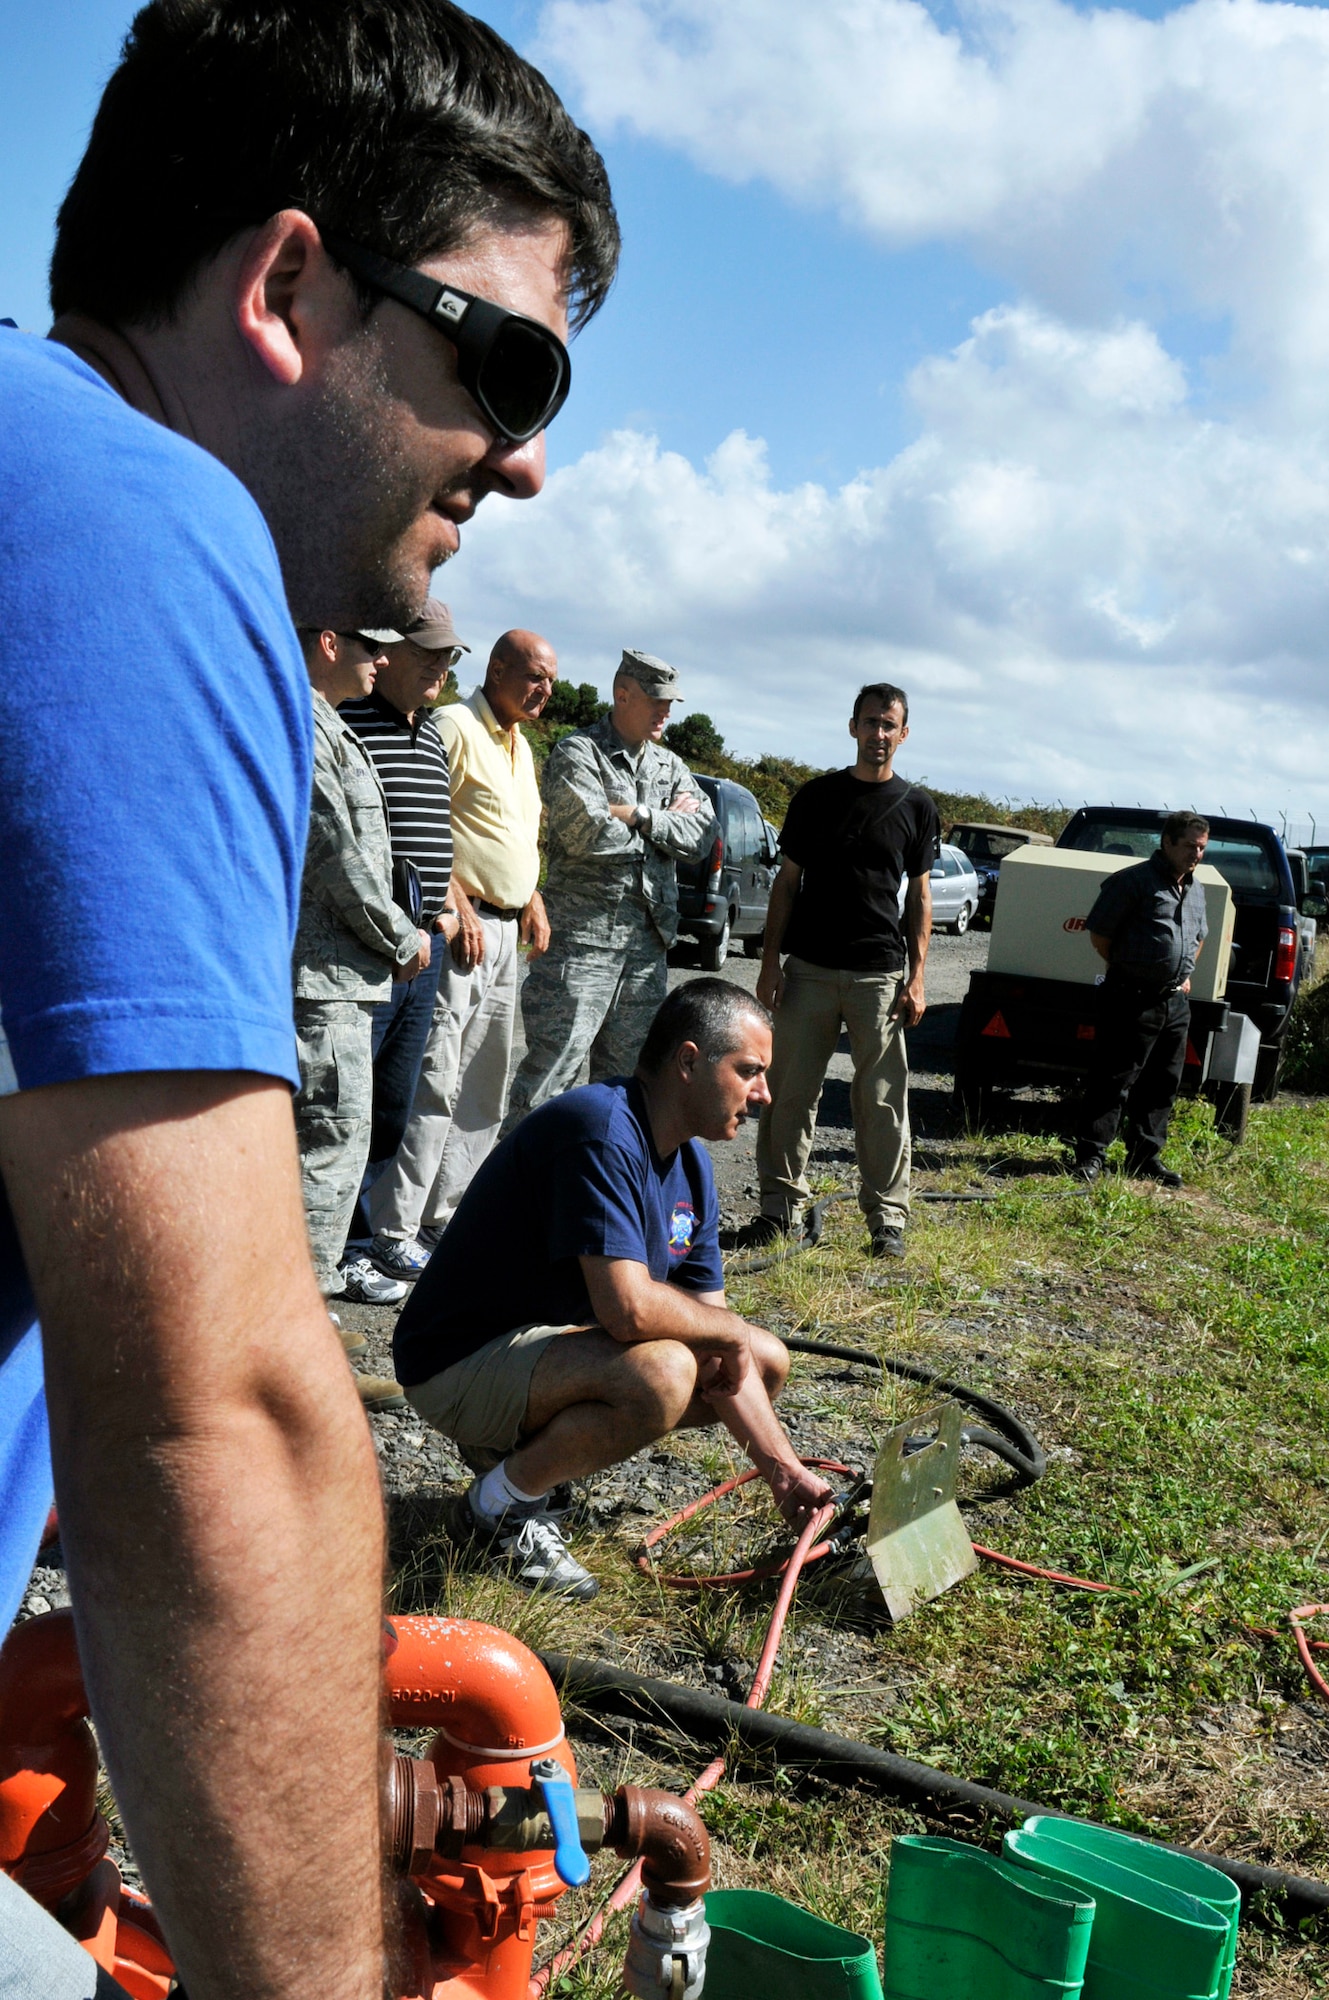 (Far left) Decio Avila and Jorge Arruda start a pump, which operates a boom and skimmer, during a land fuel spill training exercise, as other members observe  Sept. 29, 2010, at Lajes Field, Azores. The joint exercise brought together more than 40 U.S. and host nation emergency response team members in a classroom-discussion setting and hands-on scenarios. Mr. Avila and Arruda are from the 65th Civil Engineer Squadron. (U.S. Air Force photo/Staff Sgt. Olufemi Owolabi)